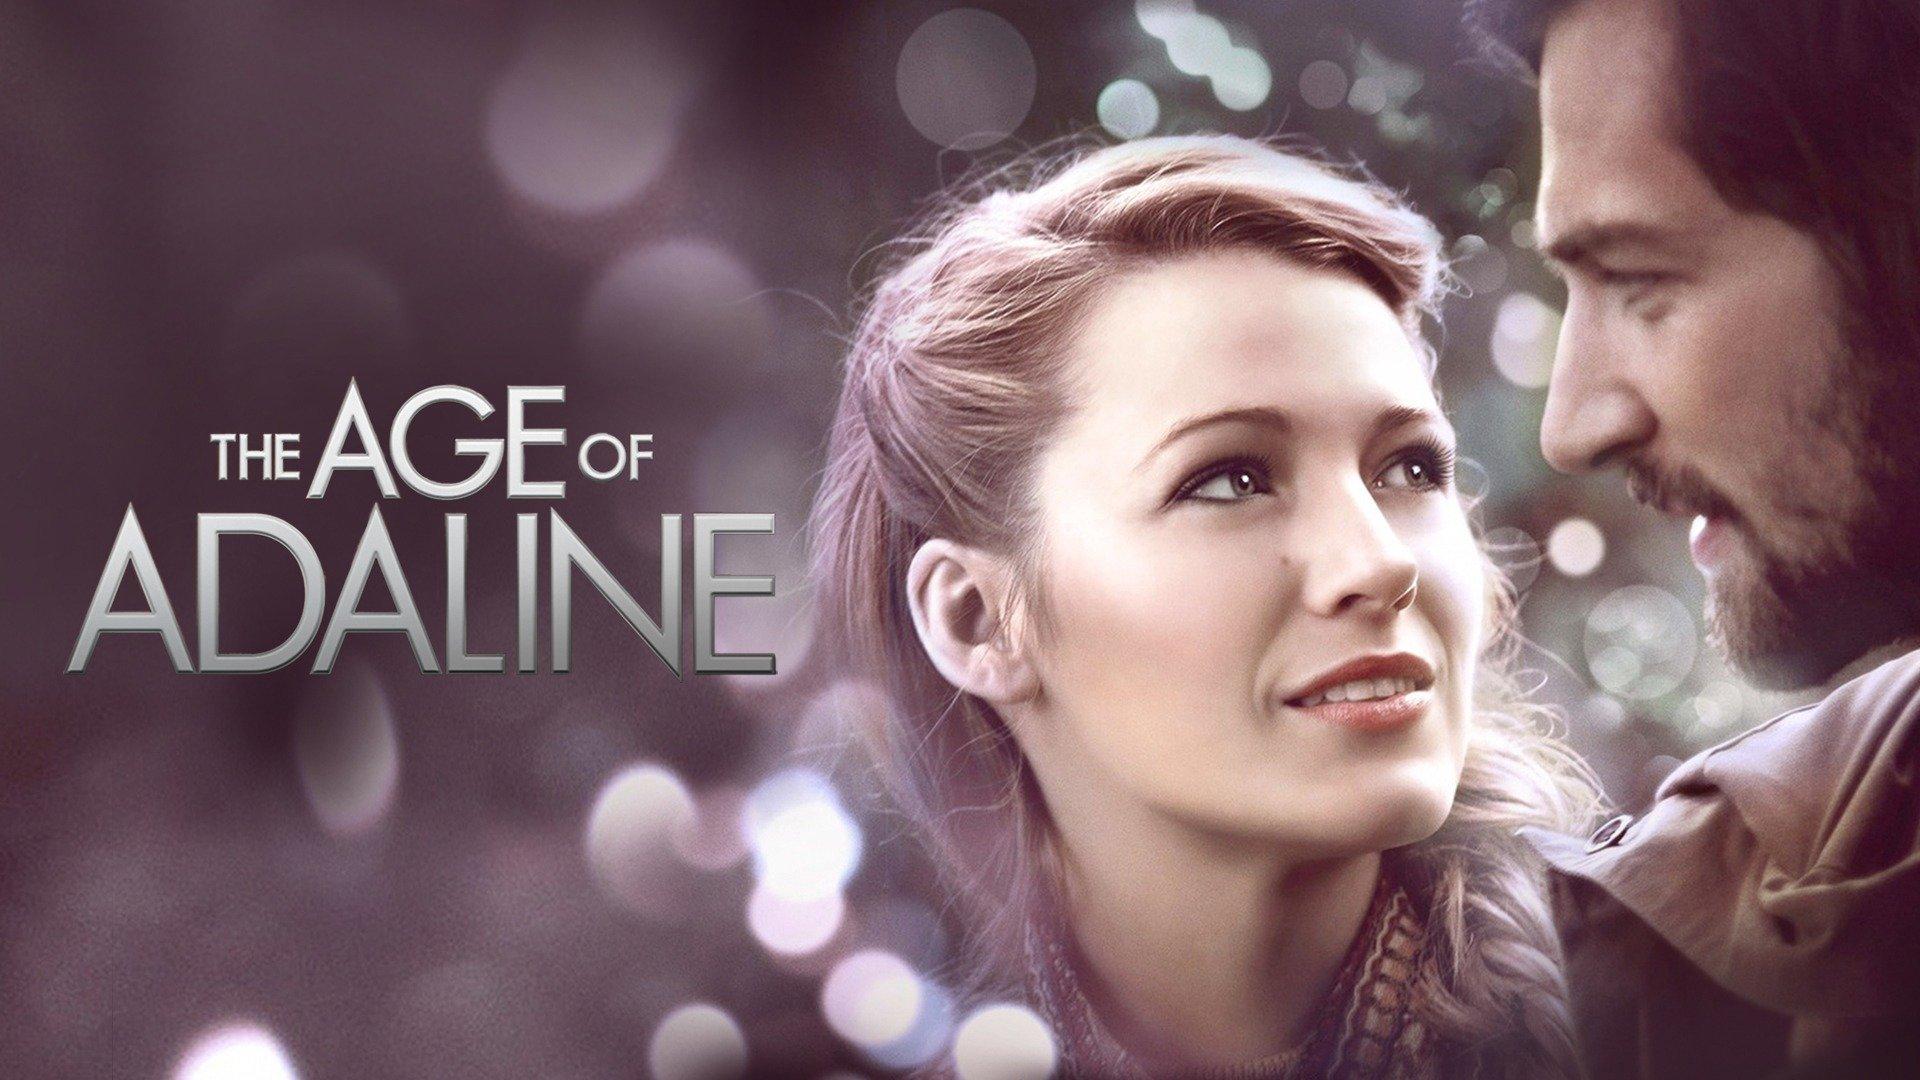 Watch The Age of Adaline Streaming Online on Philo (Free Trial)